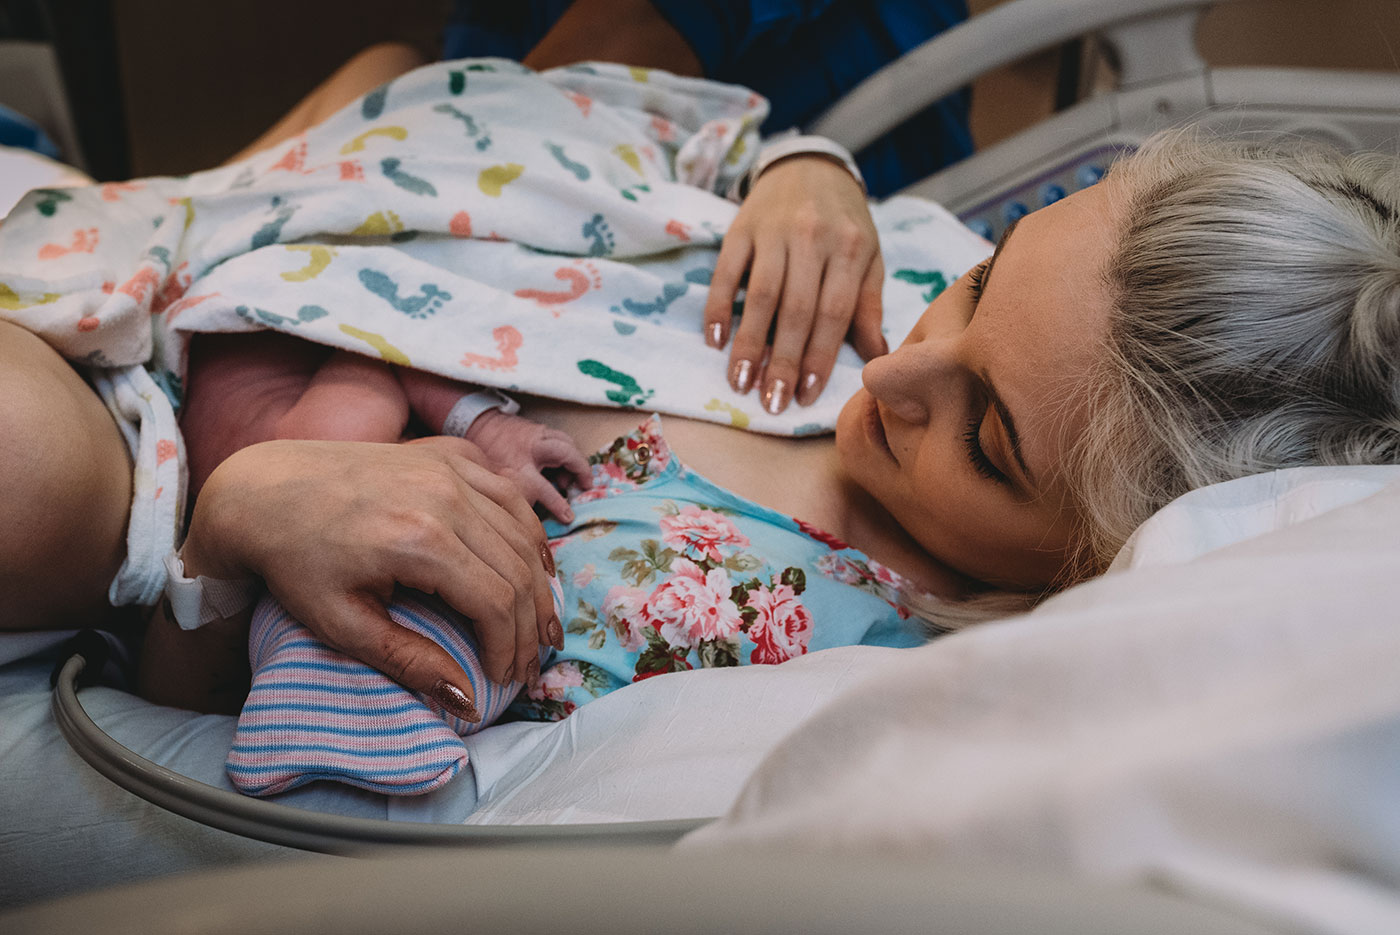 mom looks down at her newborn baby wearing a pink and blue striped hat